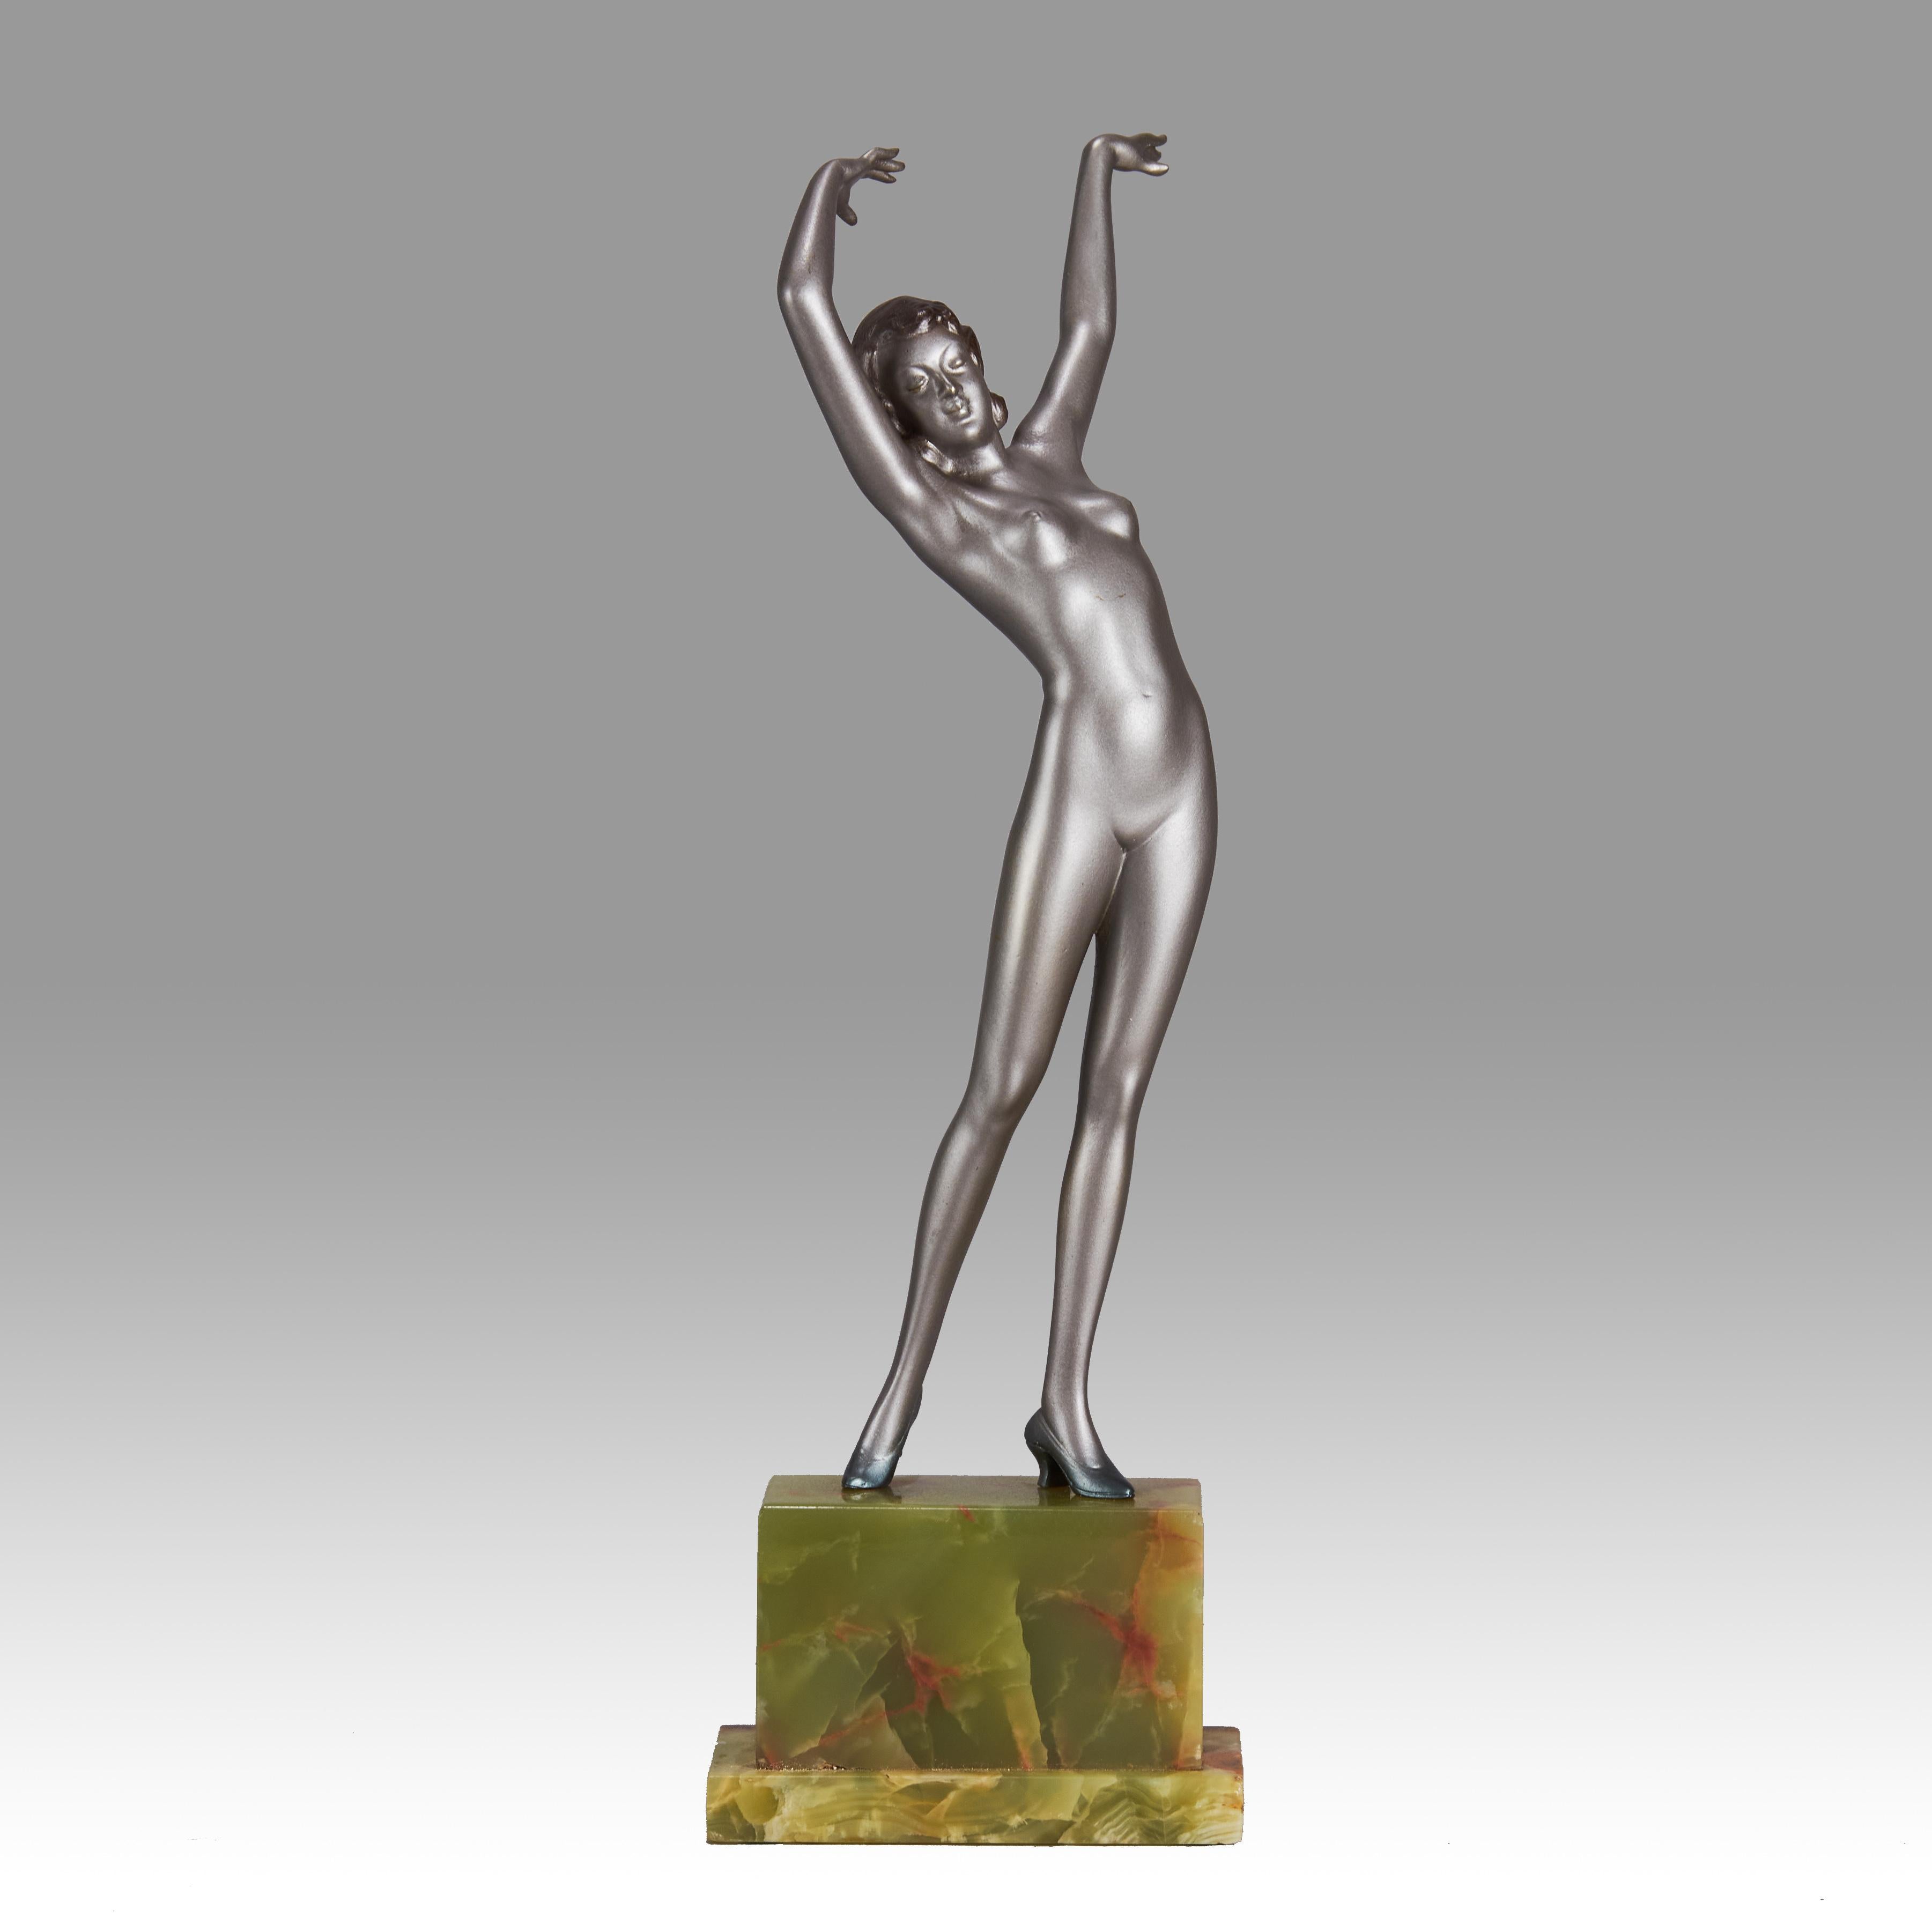 Striking early 20th Century Austrian Art Deco cold painted silver and enamel bronze figure of a young woman in stretched pose with her arms above her wearing only a pair of high heels . The surface of the bronze with excellent colour and very fine